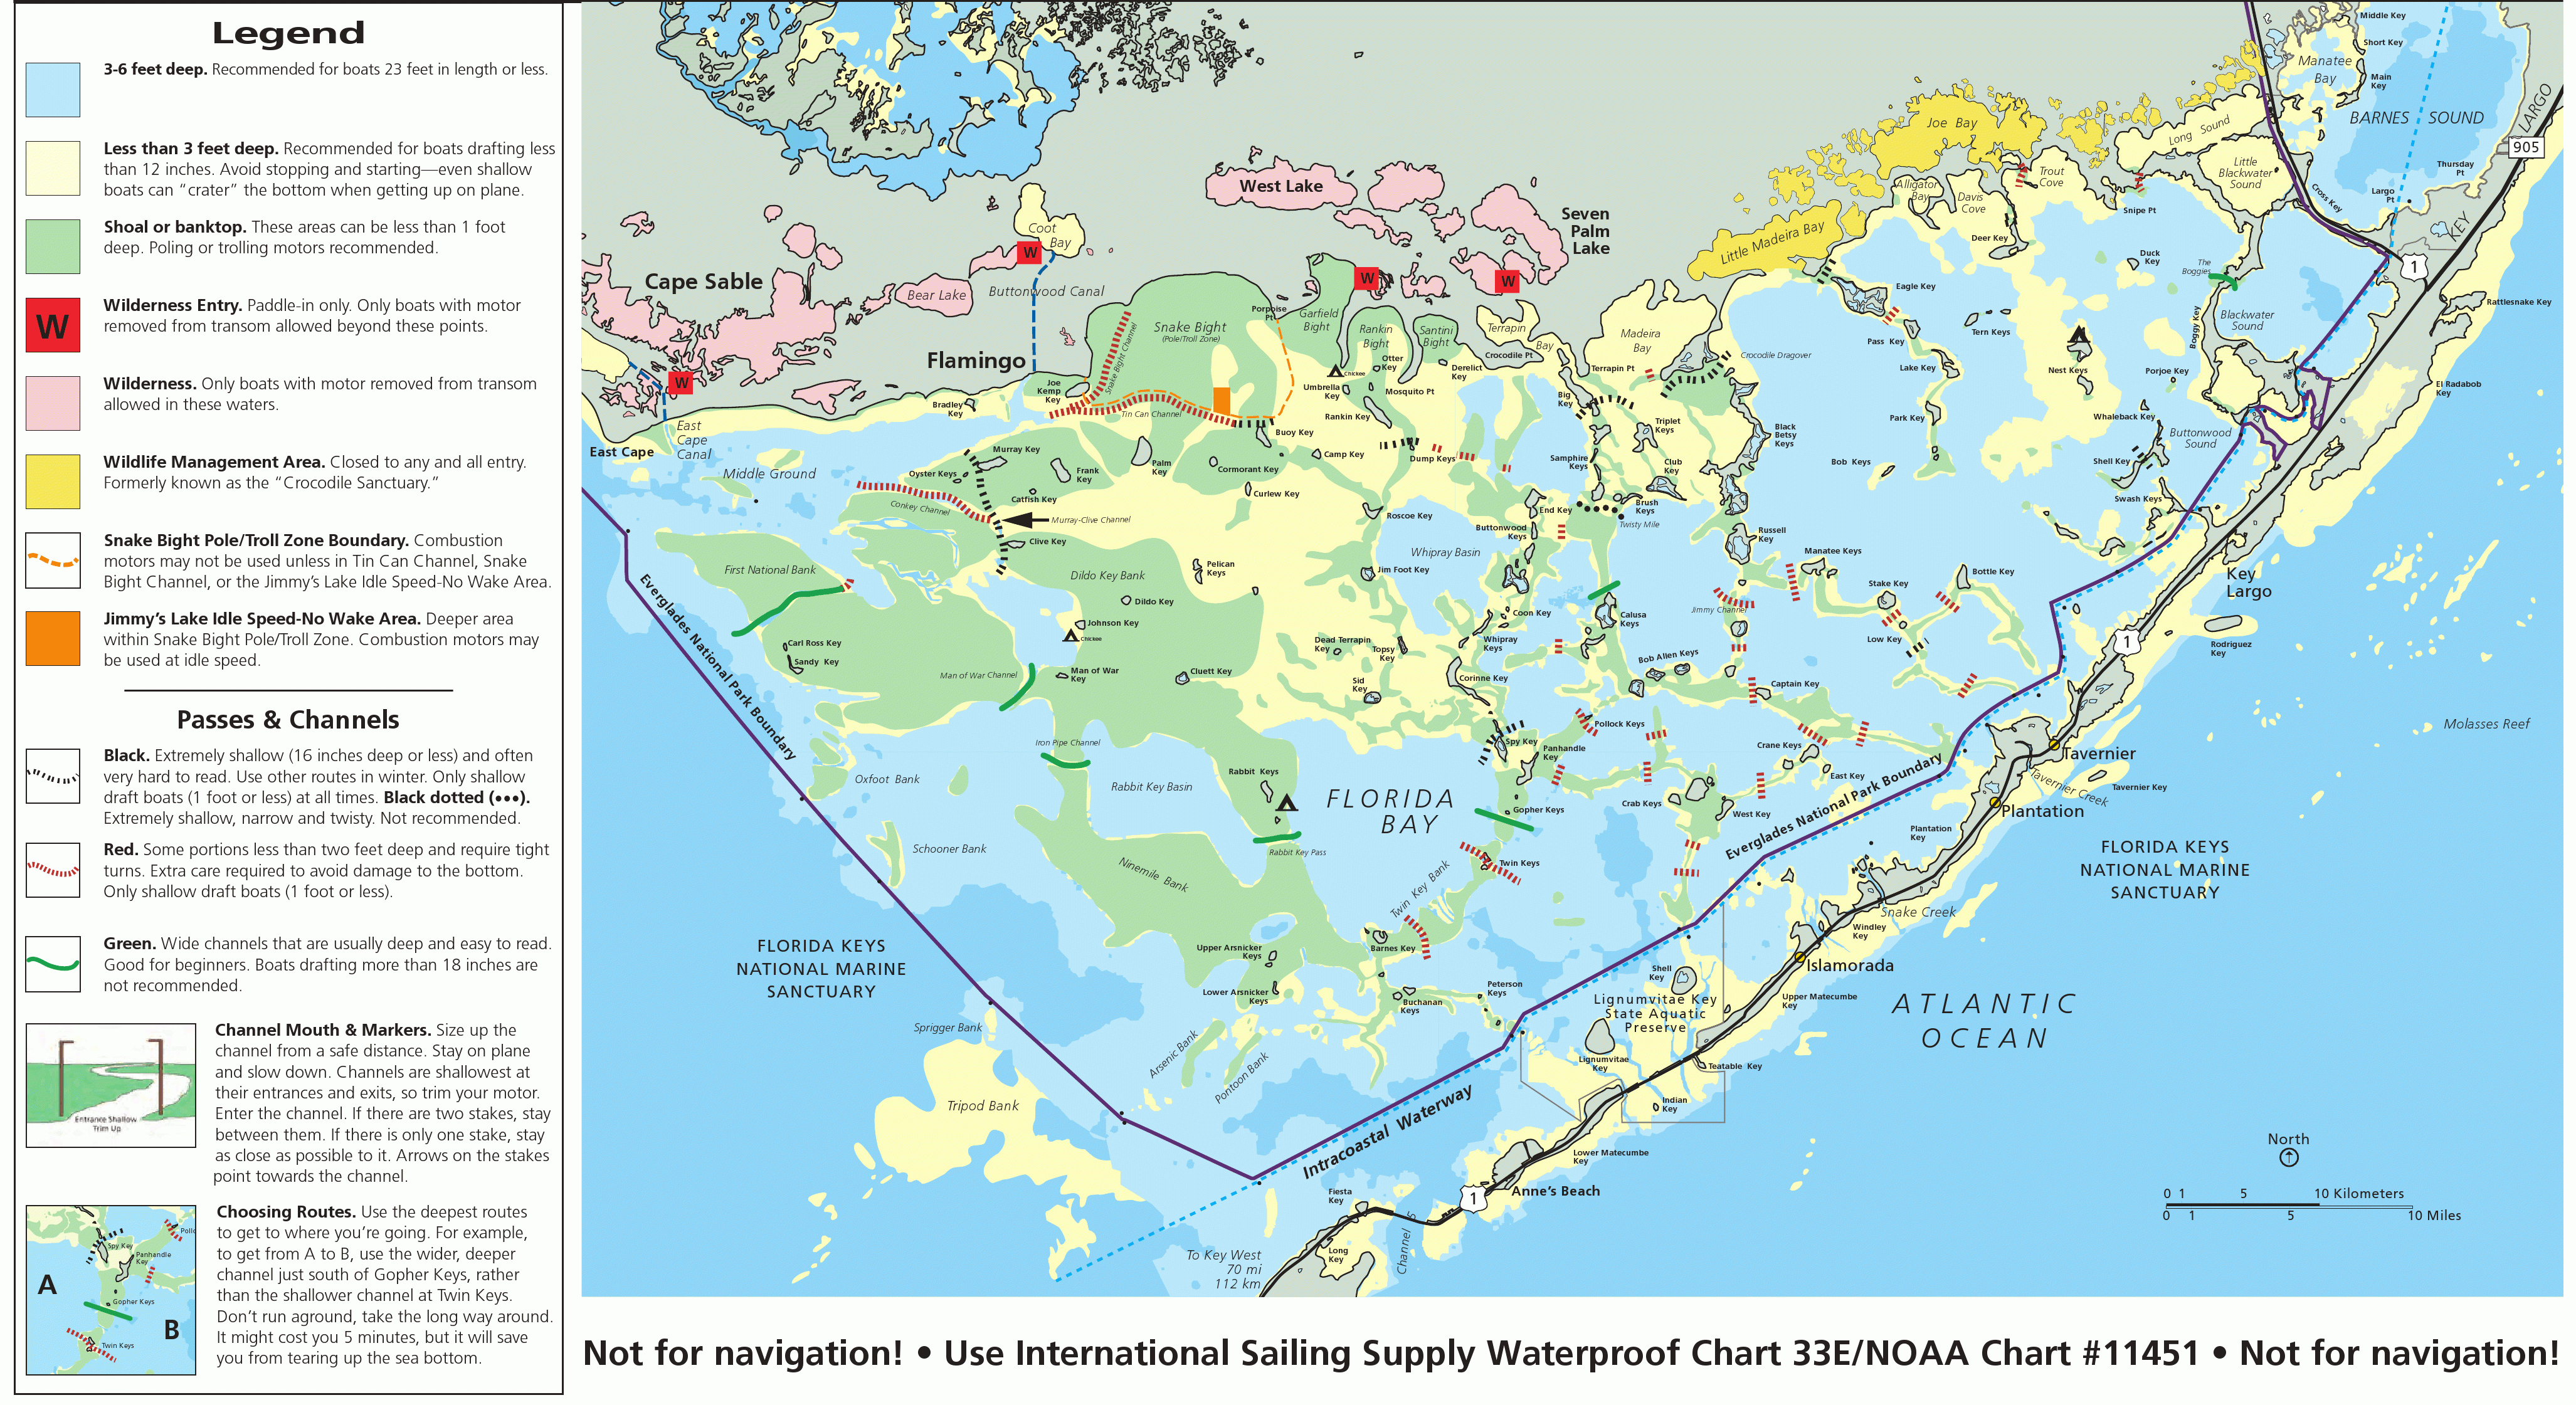 Everglades Maps | Npmaps - Just Free Maps, Period. - National Parks In Florida Map